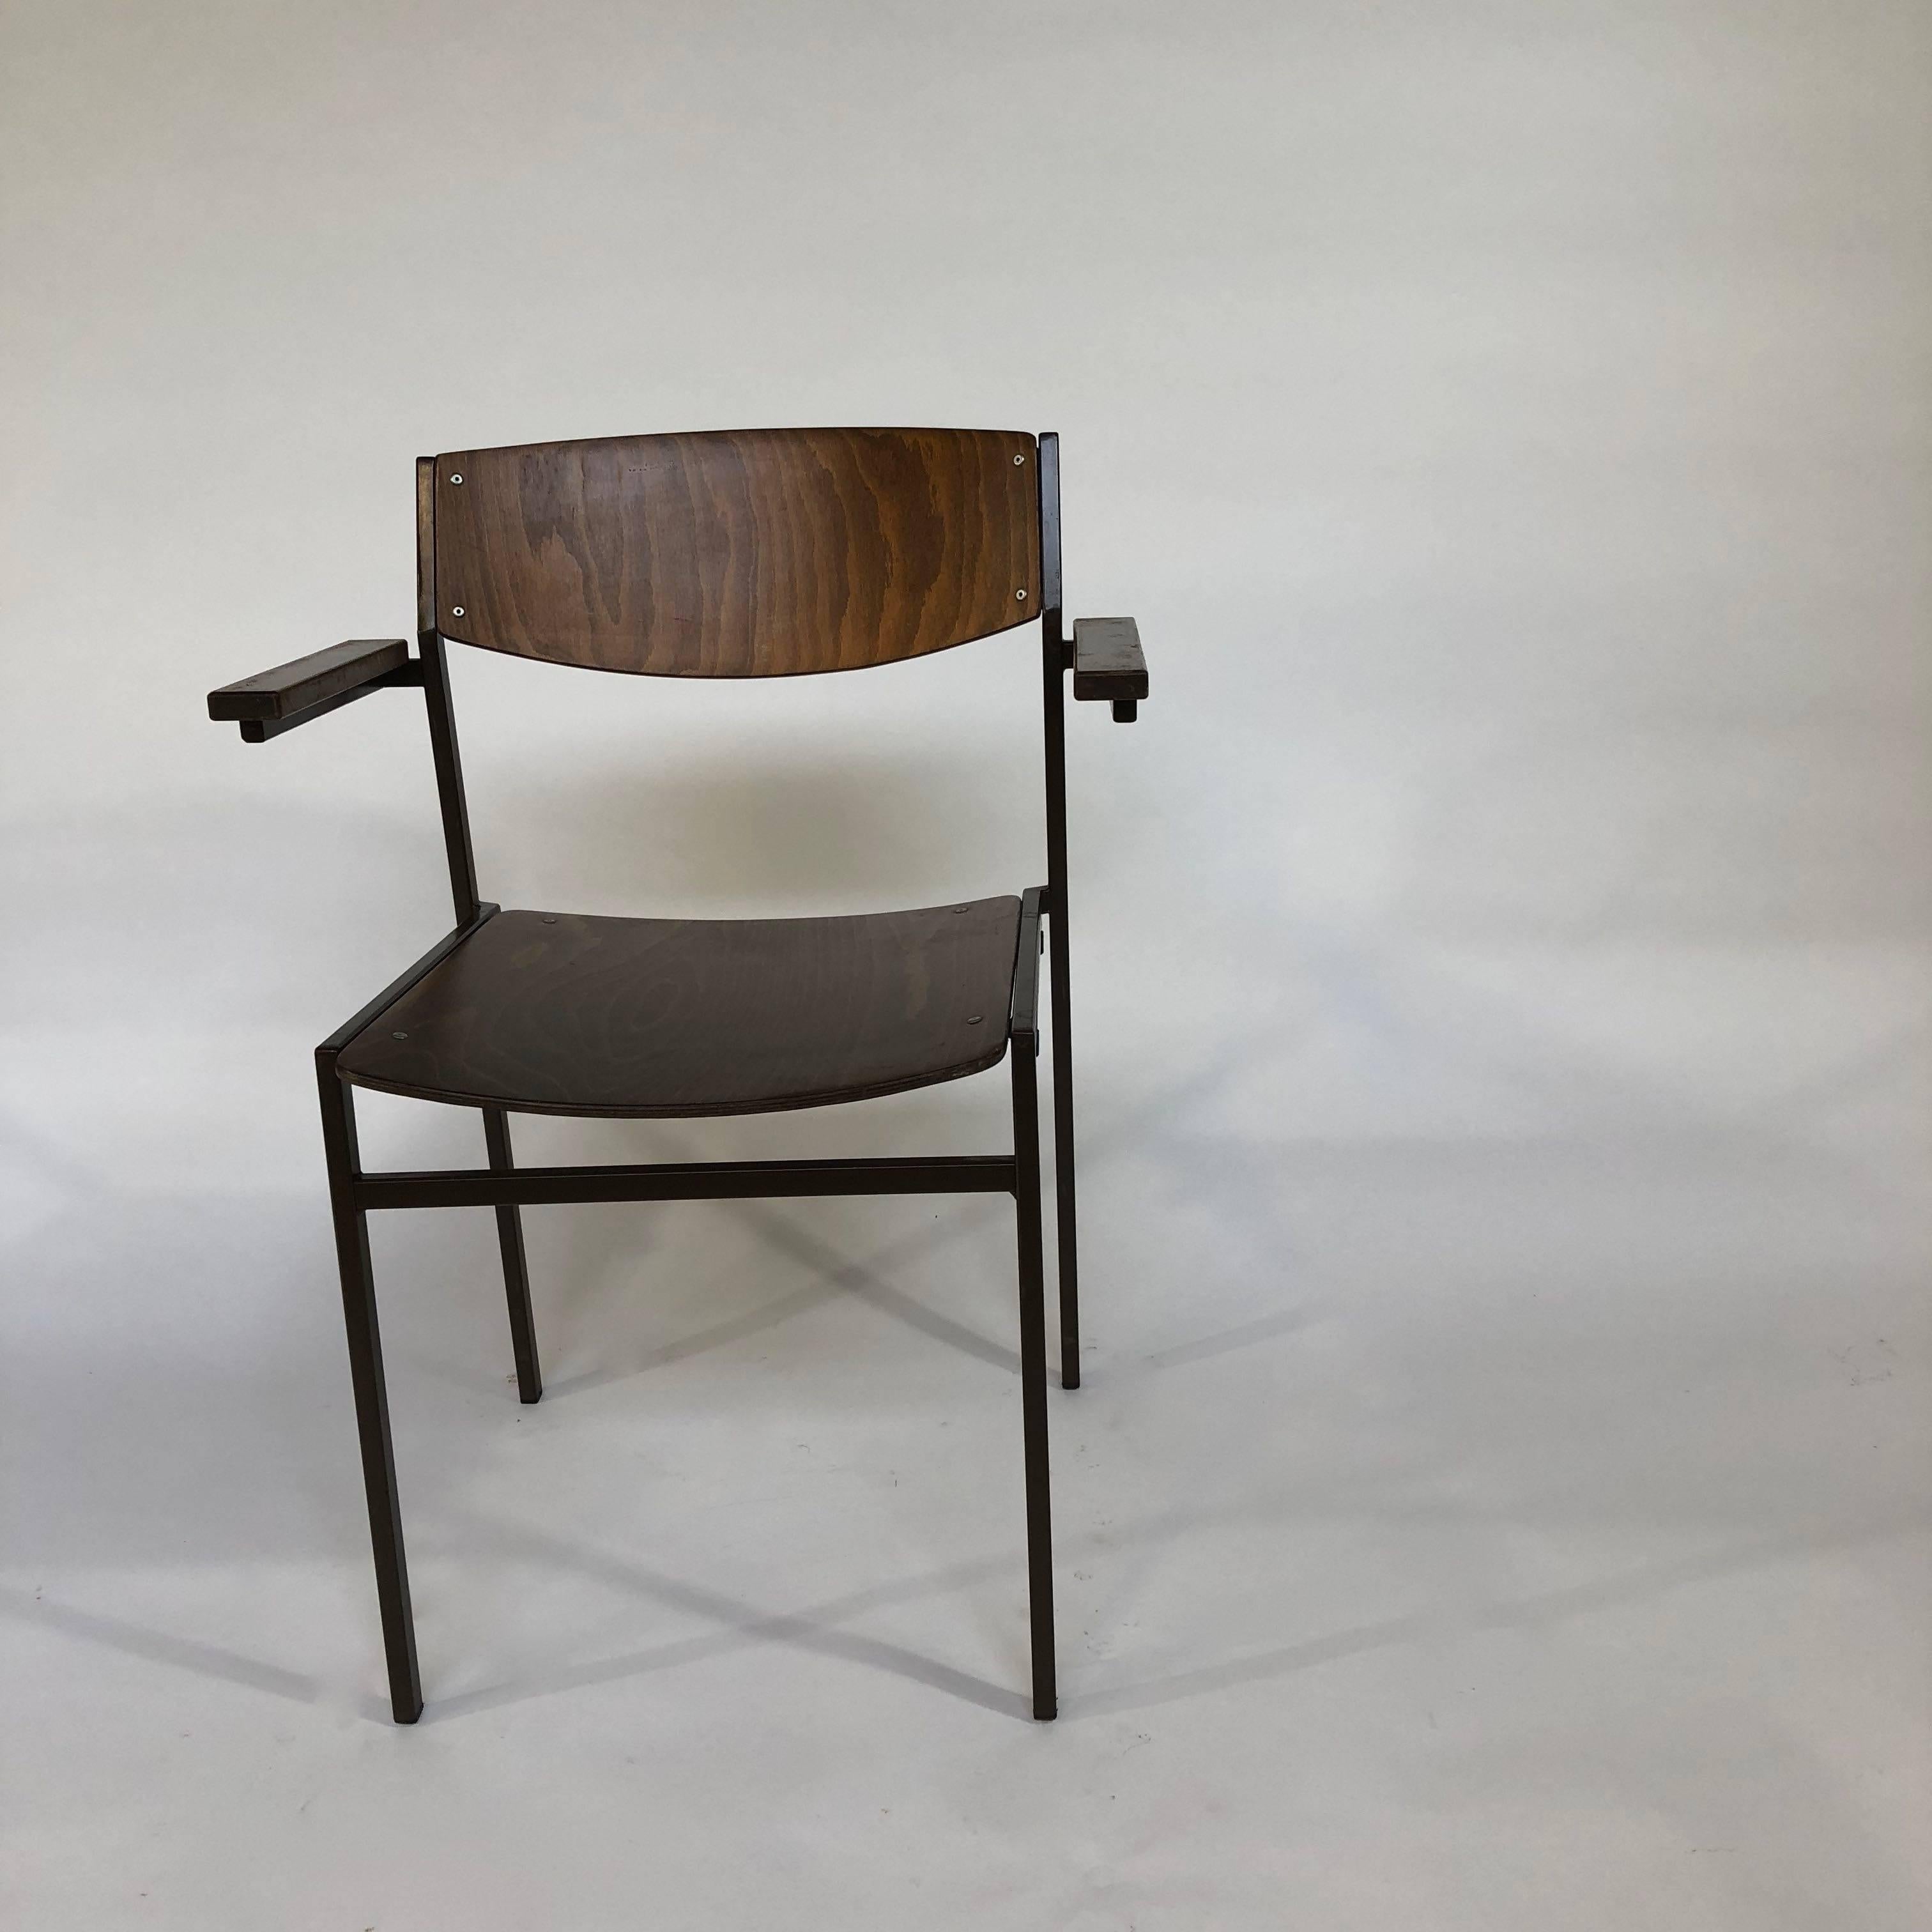 Gijs Van Der Sluis stacking chairs. Designer Gijs Van Der Sluis  for Gispen 
 from the Netherlands. Square metal chocolate enameled frame with birch wood seat (wood varies in tone, attached with blind rivets). In Original condition, some